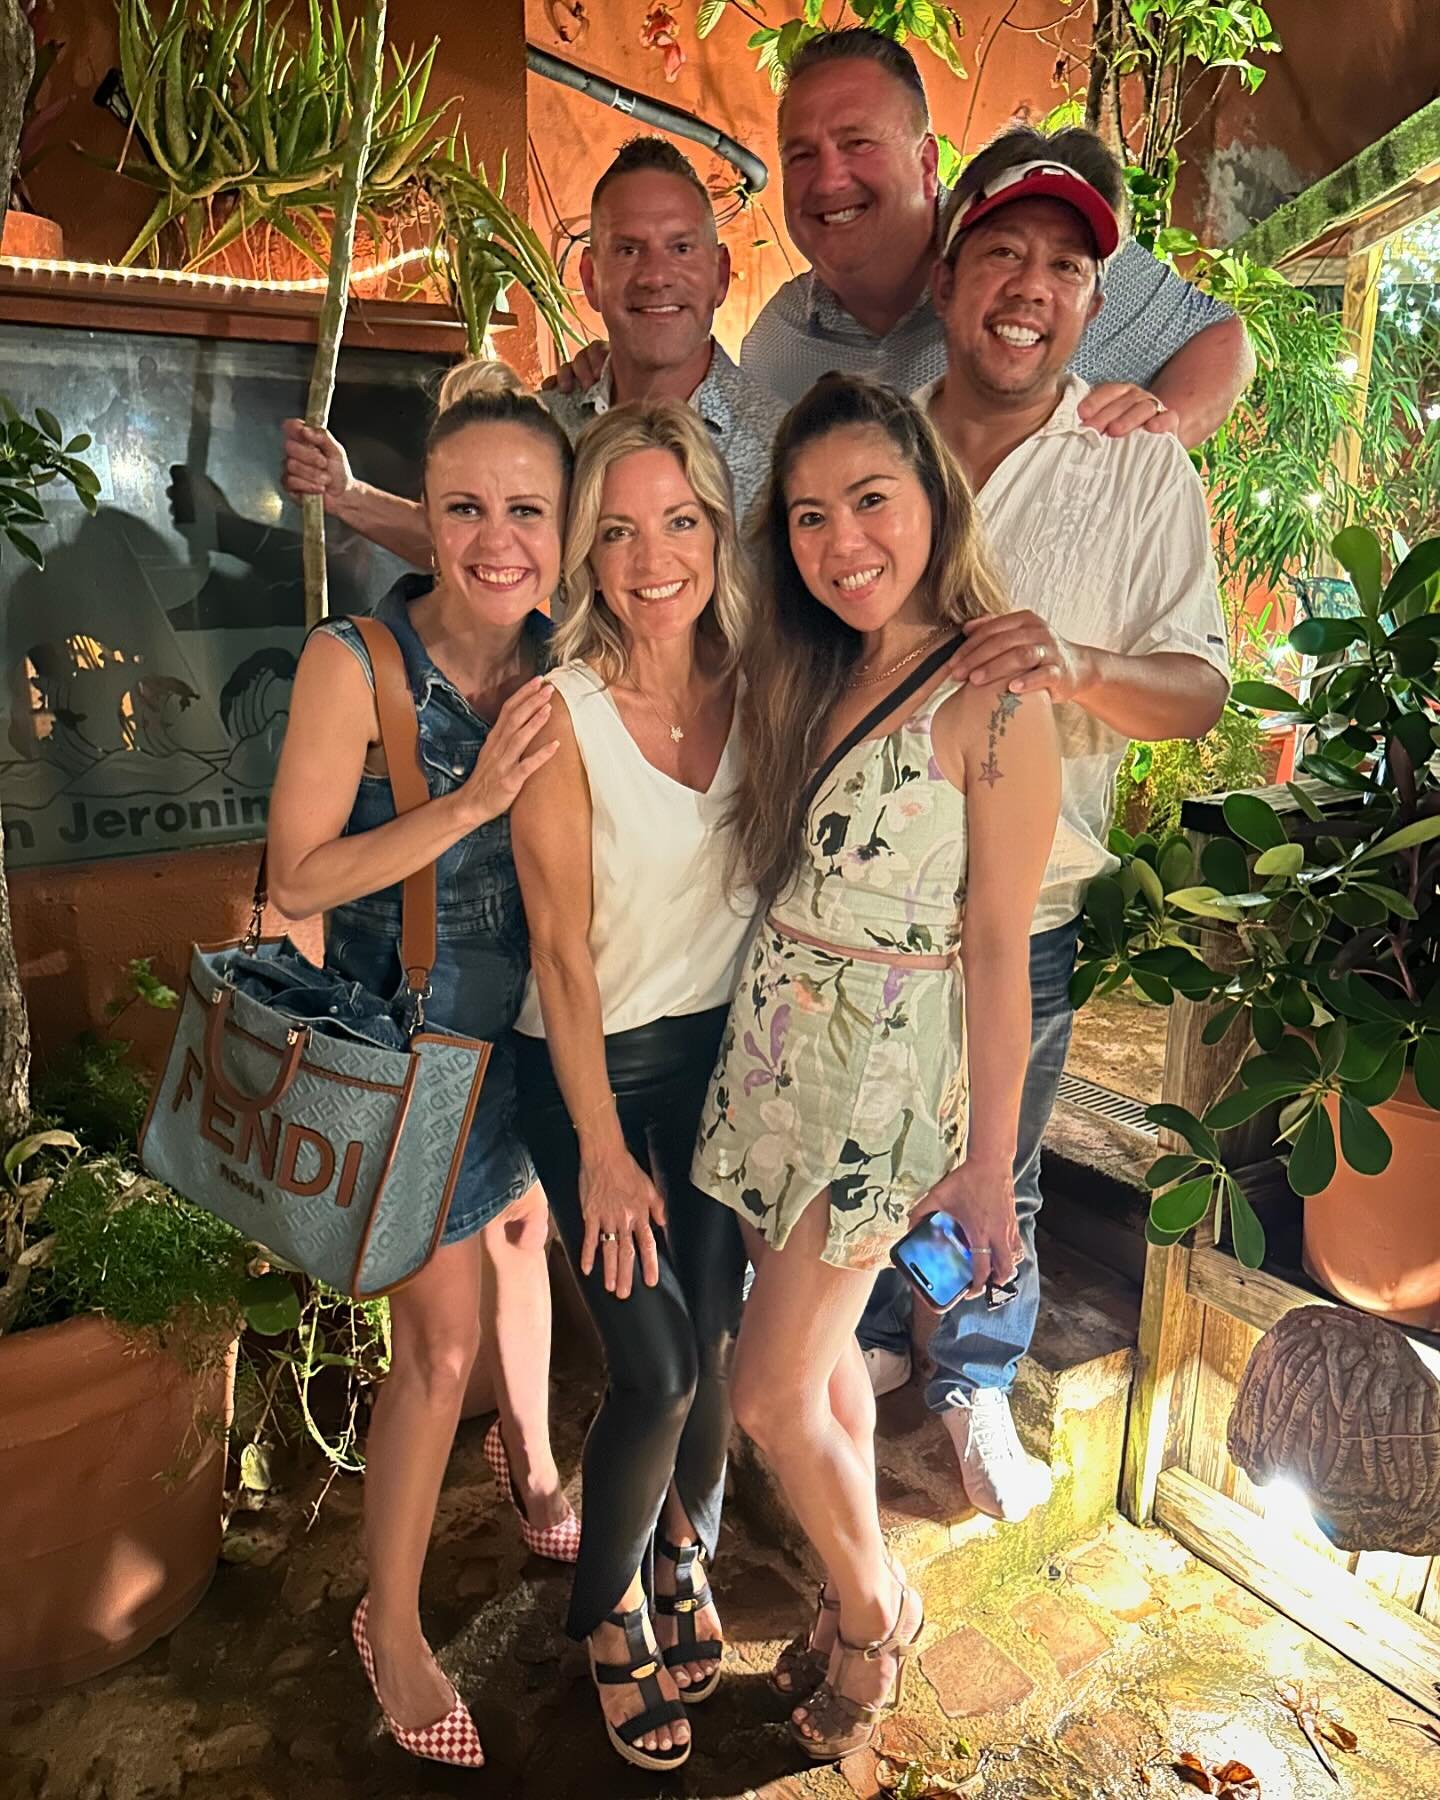 God LOVES us. He is real. He WILL speak to you. You can feel him. Miracles are possible. Healing is for you. Loved dinner with friends at the end of the encounter in Puerto Rico! 

I feel closest to God when I help others get close to him. DM me if y